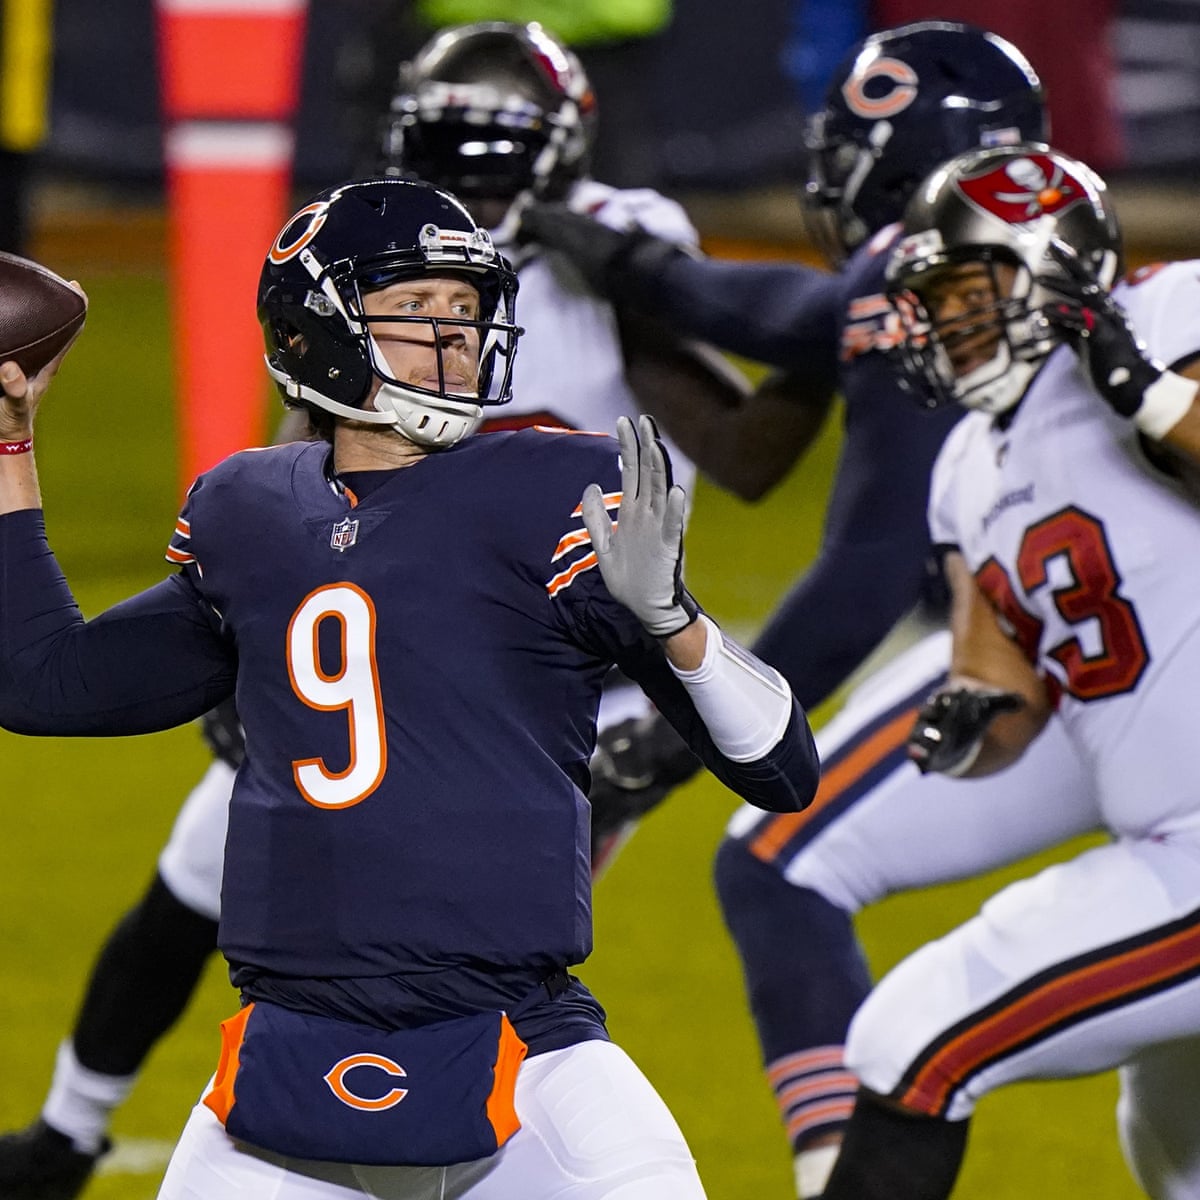 Foles thwarts Brady again as Chicago Bears rally past Tampa Bay Buccaneers, NFL